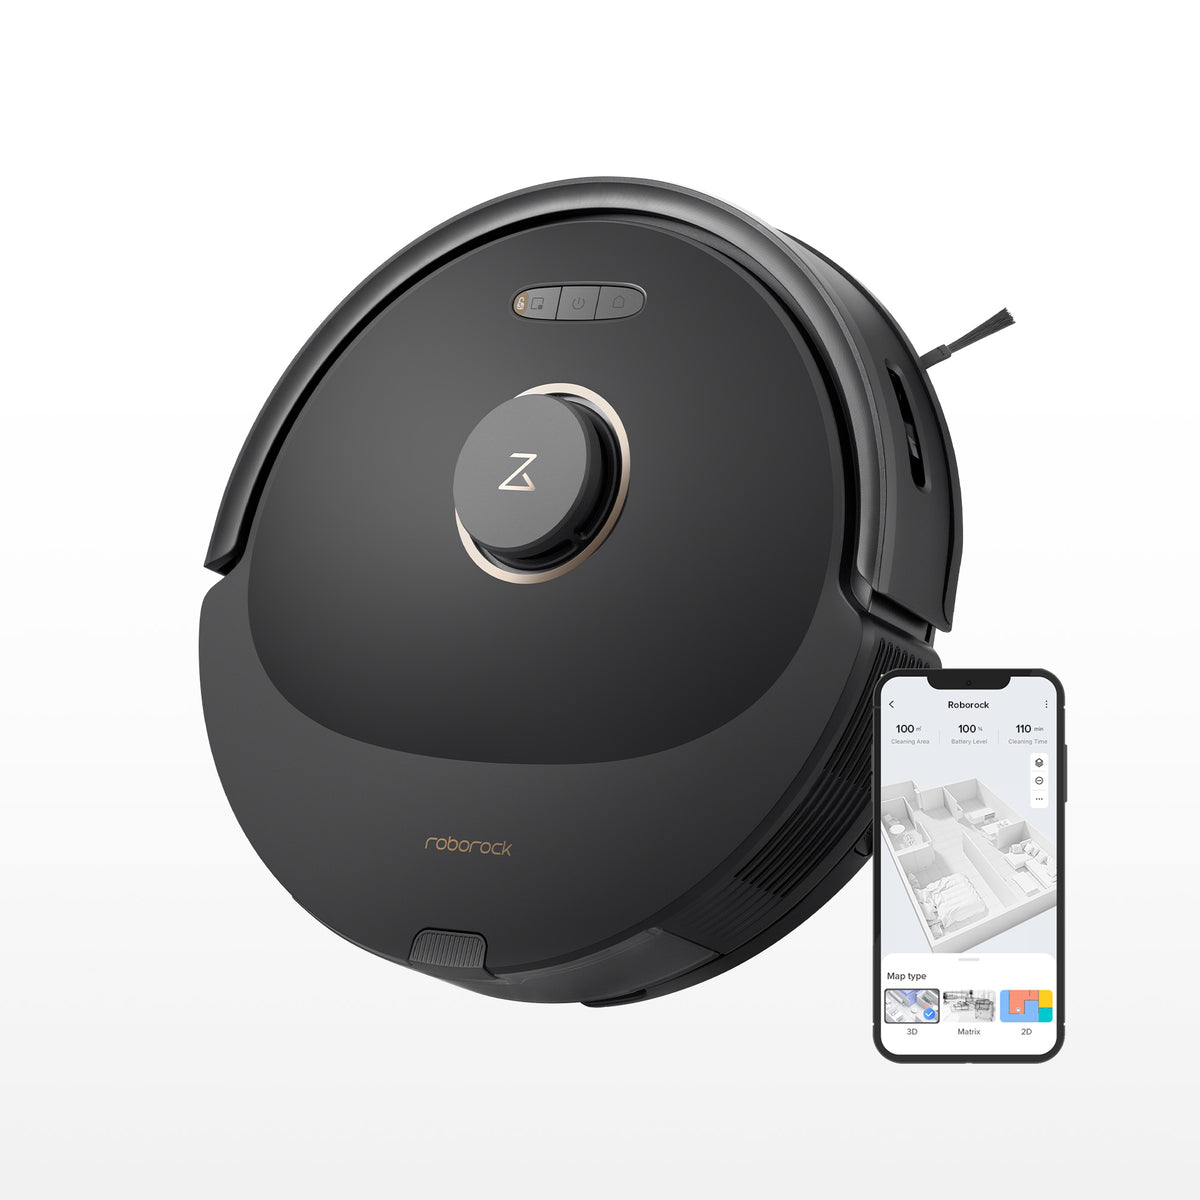 Roborock Q8 Max+ Robot Vacuum Review - Dual Rollers on a